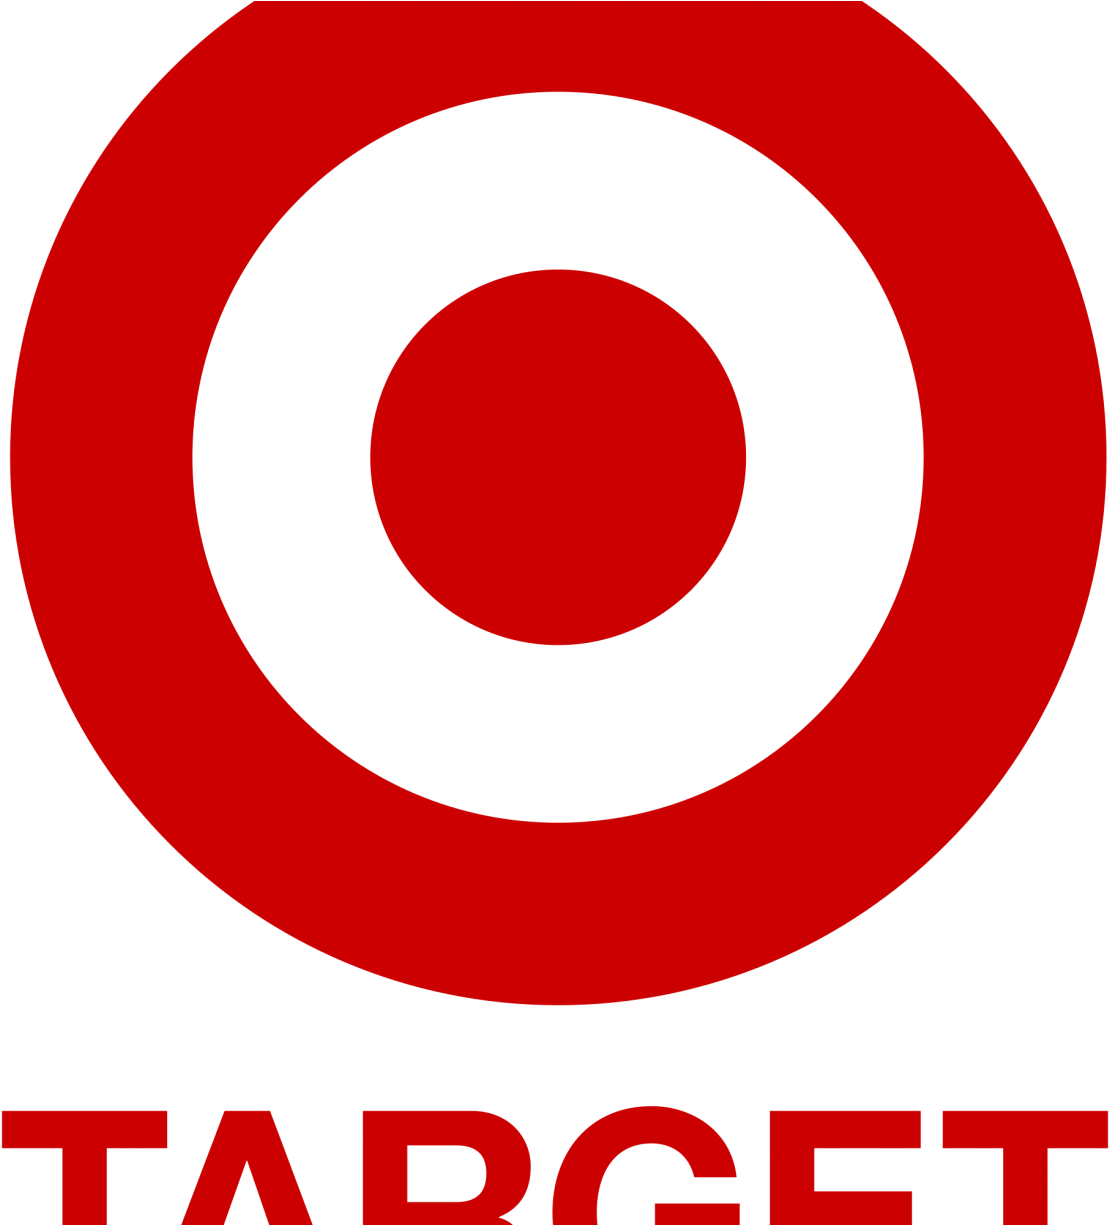 Target Business Card Target Business Credit Card Choice - Companies That Use Circles In Their Logos (1224x1224)